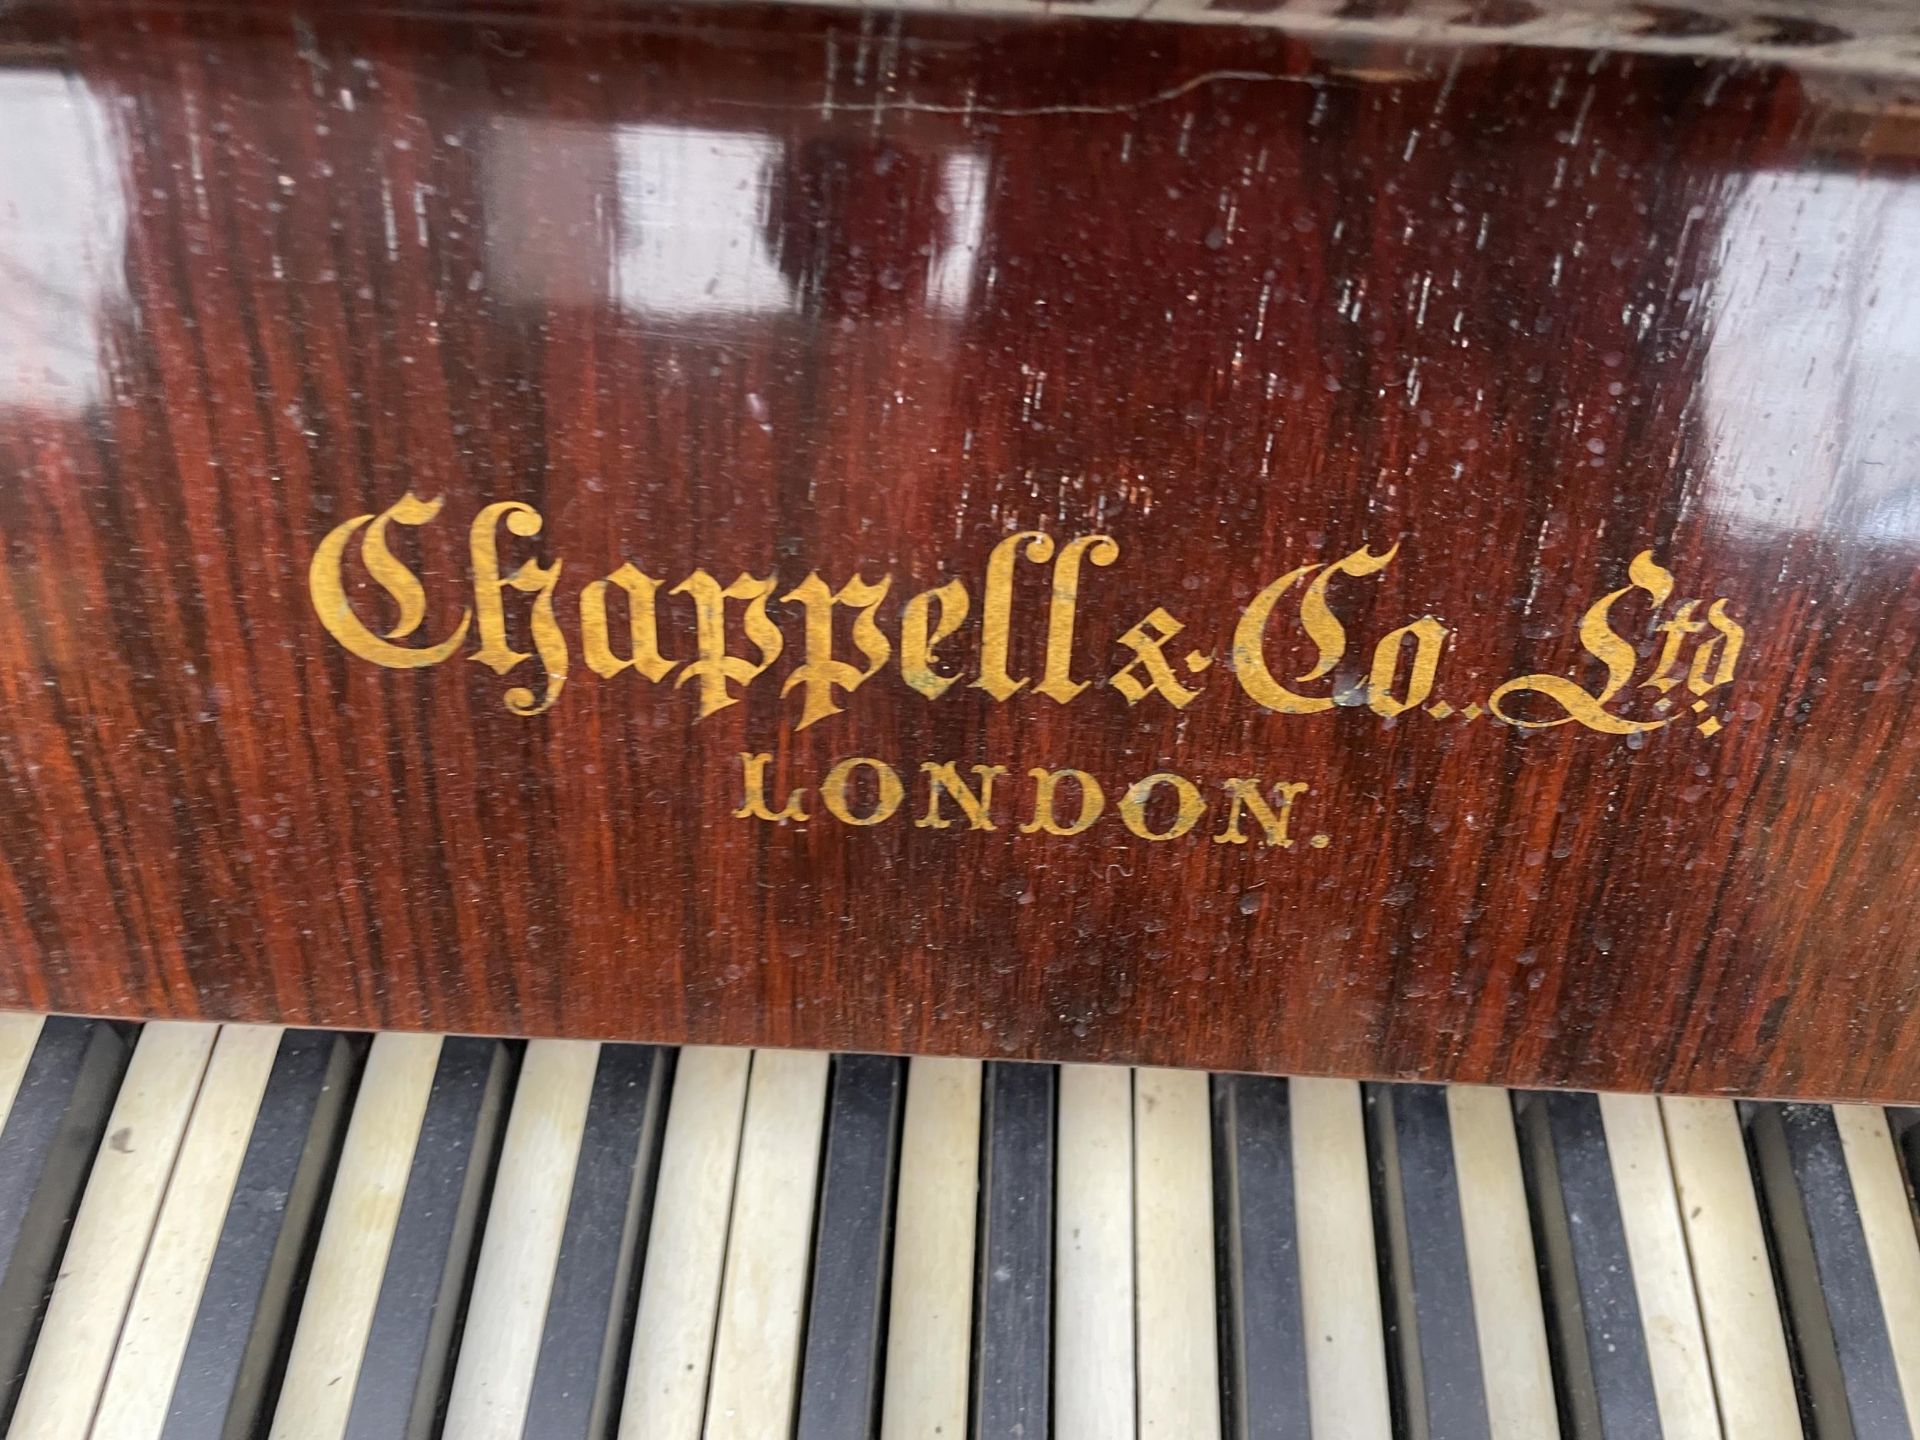 A CHAPPELL & CO LTD UPRIGHT PIANO STAMPED HARTSON & SON, NEWARK - Image 3 of 4